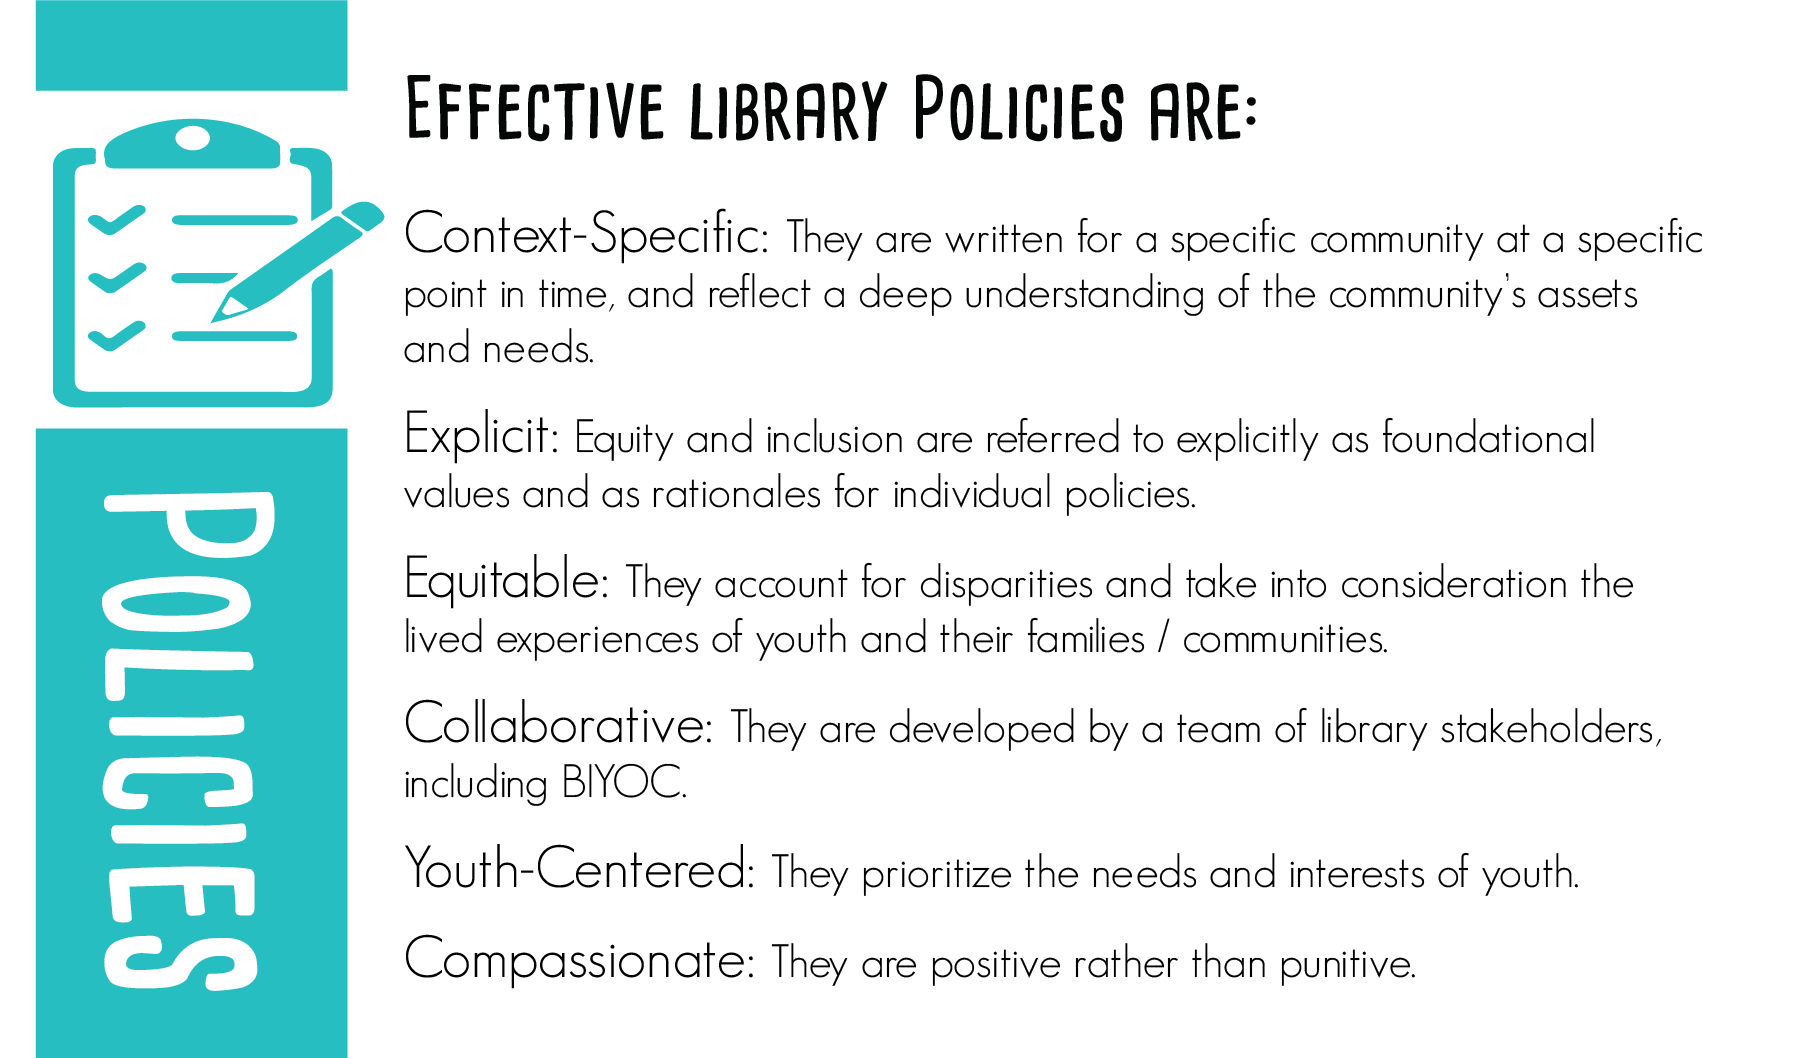 Effective library policies are:  Context-specific: They are written for a specific community at a specific point in time, and reflect a deep understanding of the community’s assets and needs.  Explicit: Equity and inclusion are referred to explicitly as foundational values and as rationales for individual policies.  Equitable: They account for disparities and take into consideration the lived experiences of youth and their families / communities.  Collaborative: They are developed by a team of library stakeholders, including BIYOC.  Youth-Centered: They prioritize the needs and interests of youth.  Compassionate: They are positive rather than punitive.